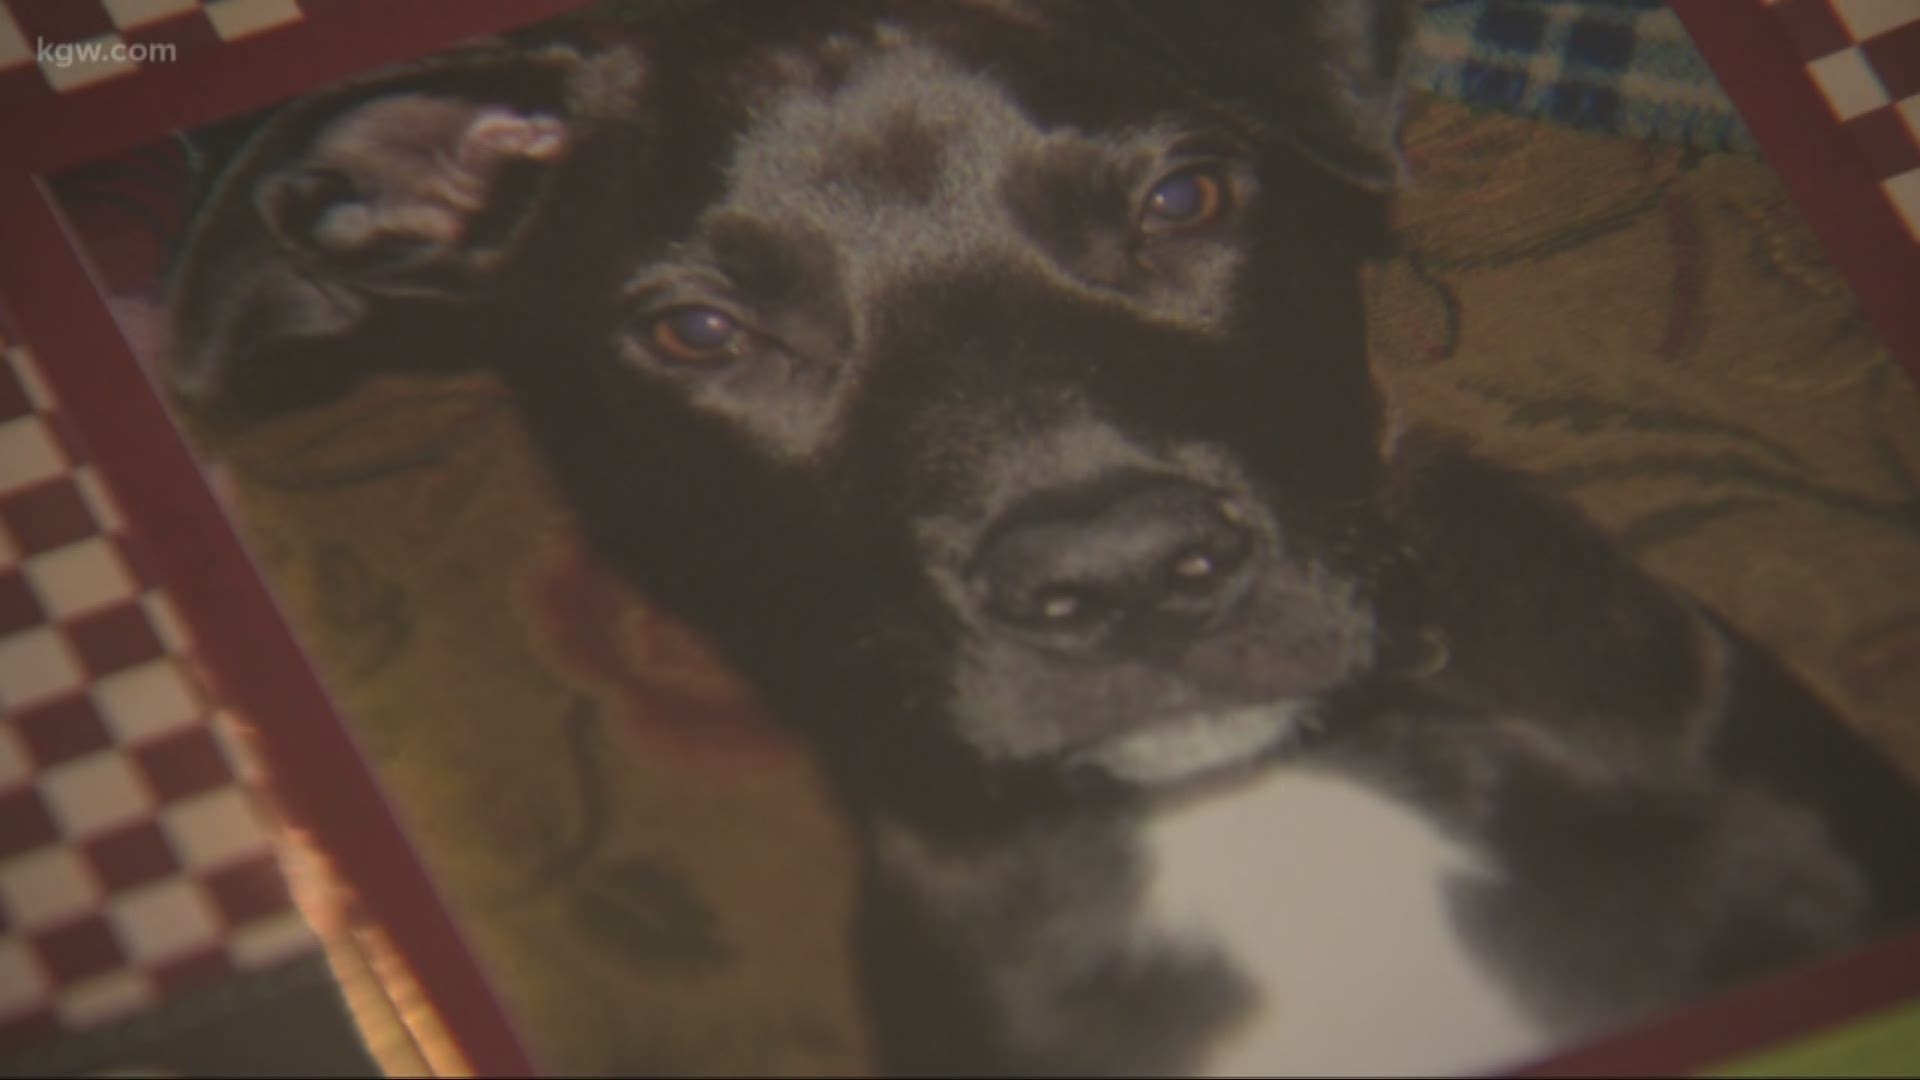 A Gresham family is calling attention to the possible link between grain-free dog food and heart disease. Their dog was diagnosed with advanced dilated cardiomyopath